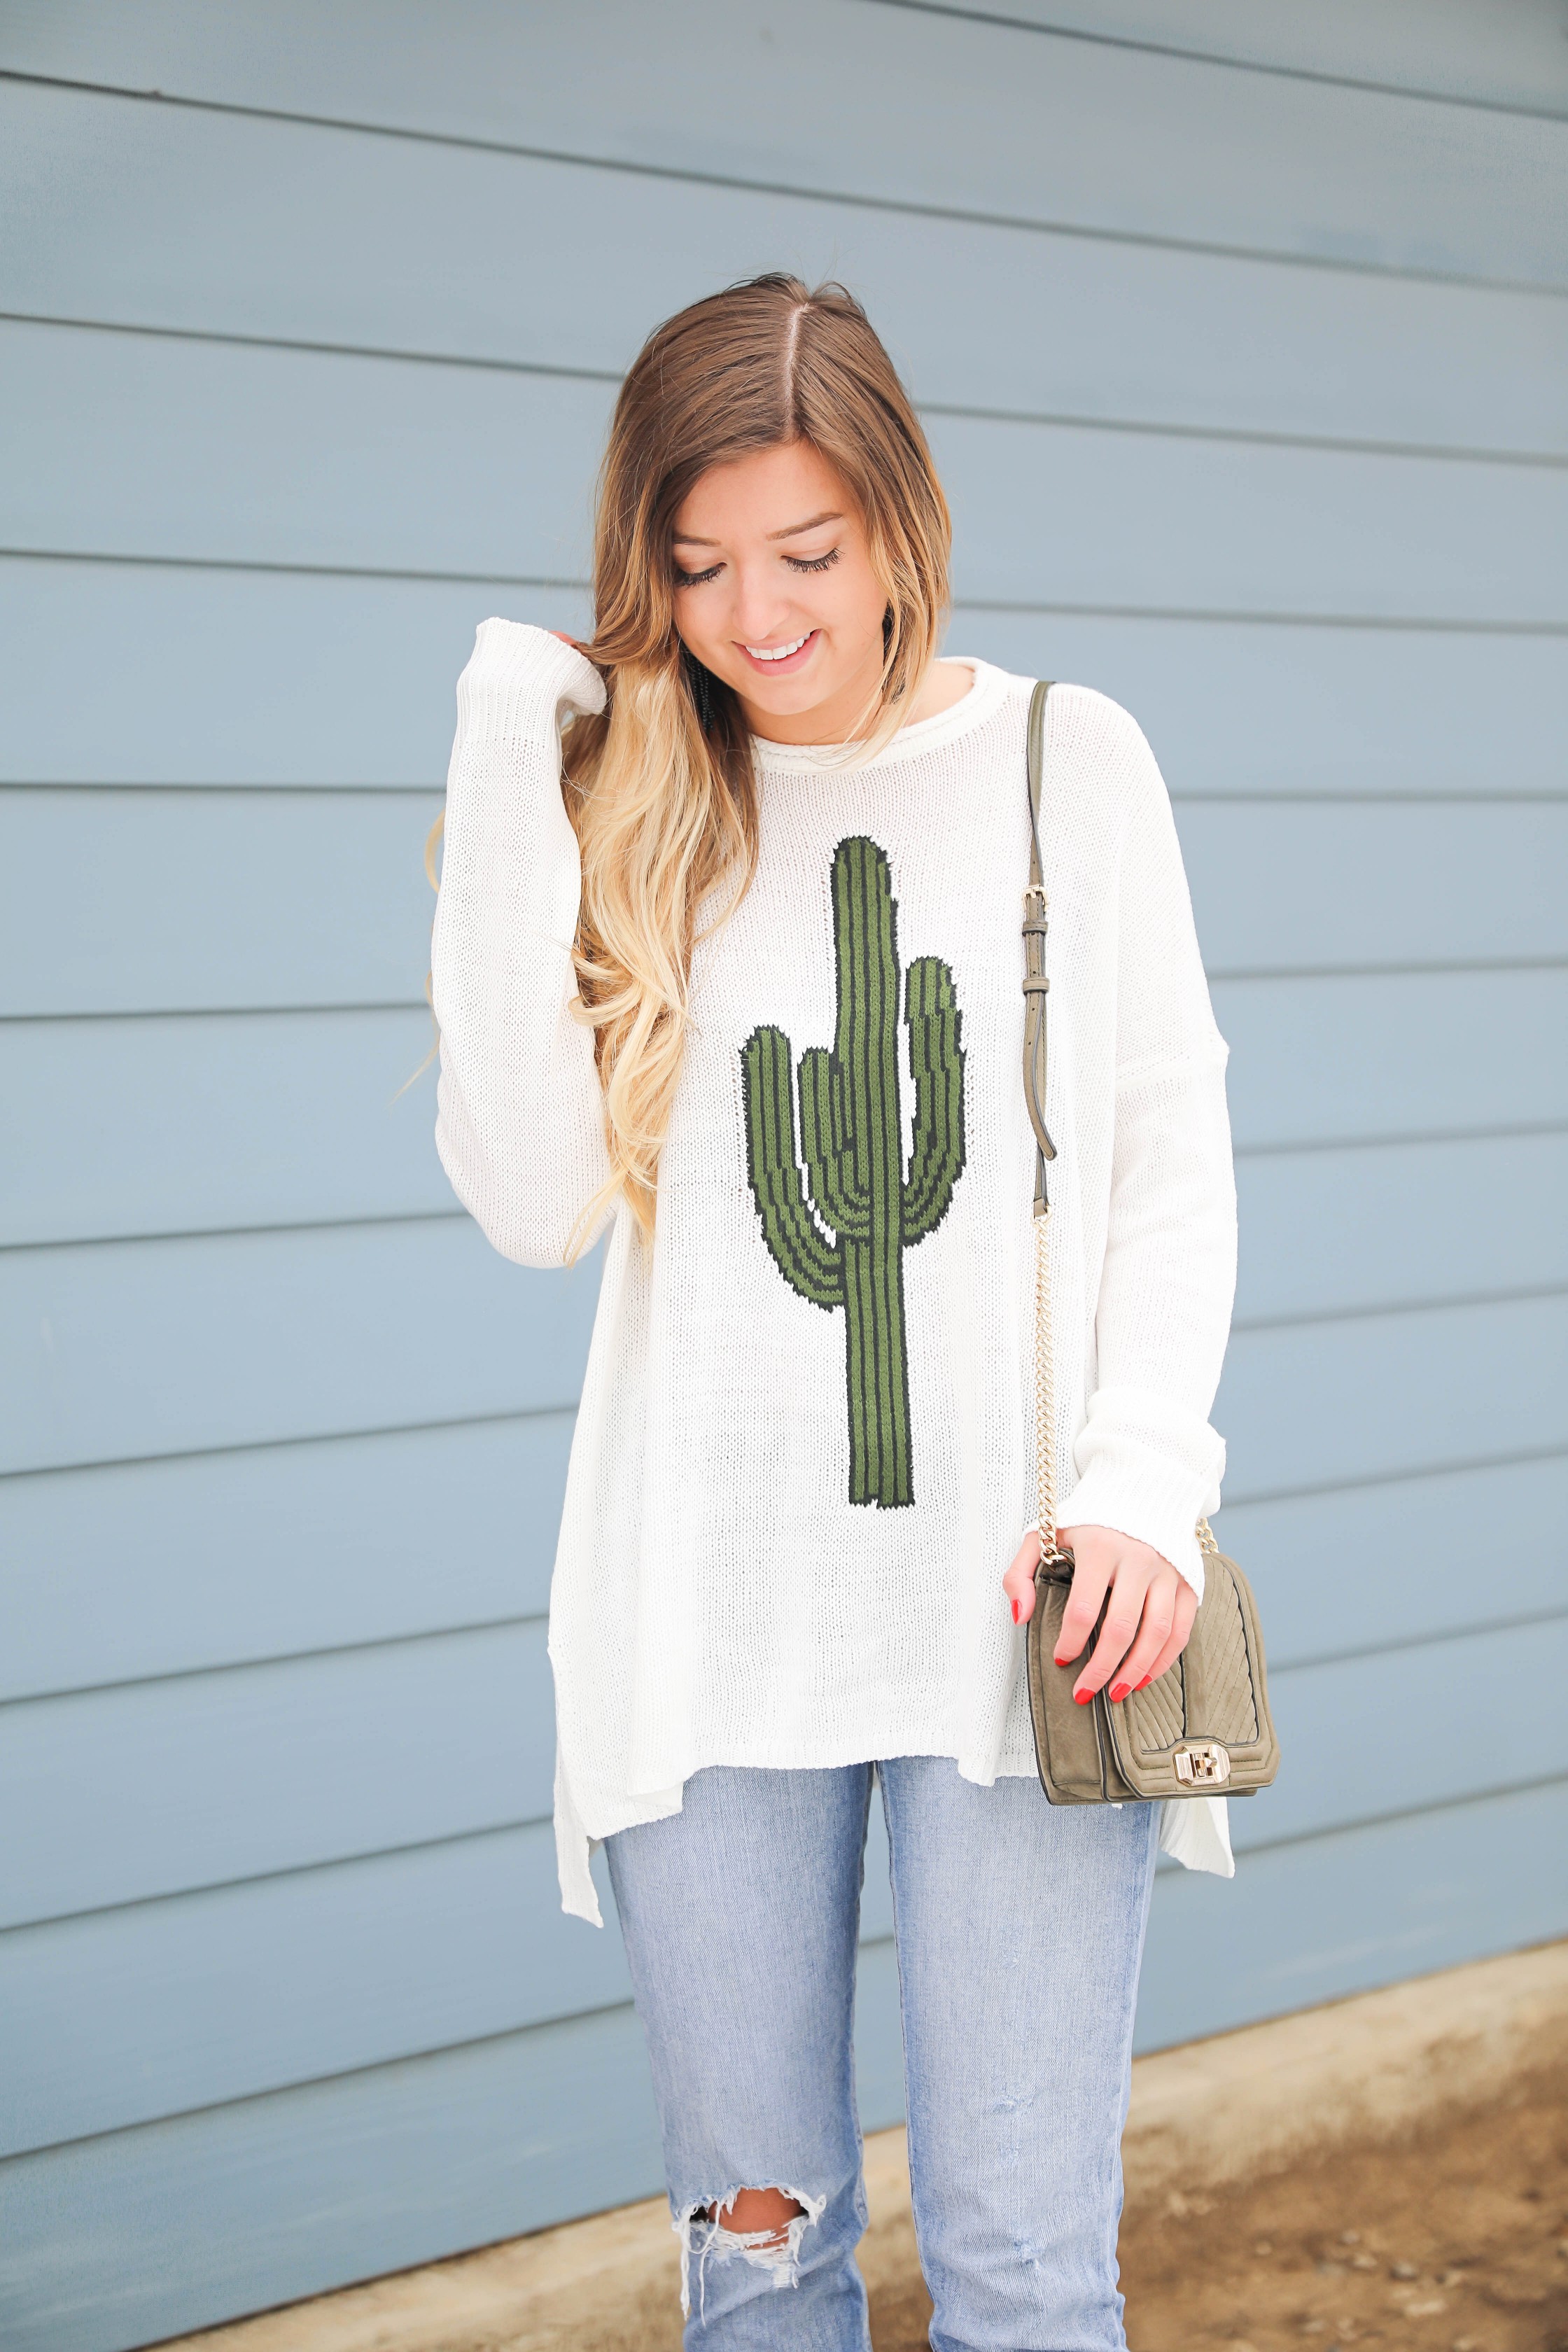 Super cute cactus sweater for spring and summer! This sweater is by Show Me Your Mumu. I love their spring cactus line, but this cactus sweater is my favorite! I paired it with booties, a black belt, and a Rebecca Minkoff bag! Perfect spring outfit inspiration on fashion blog daily dose of charm by lauren lindmark